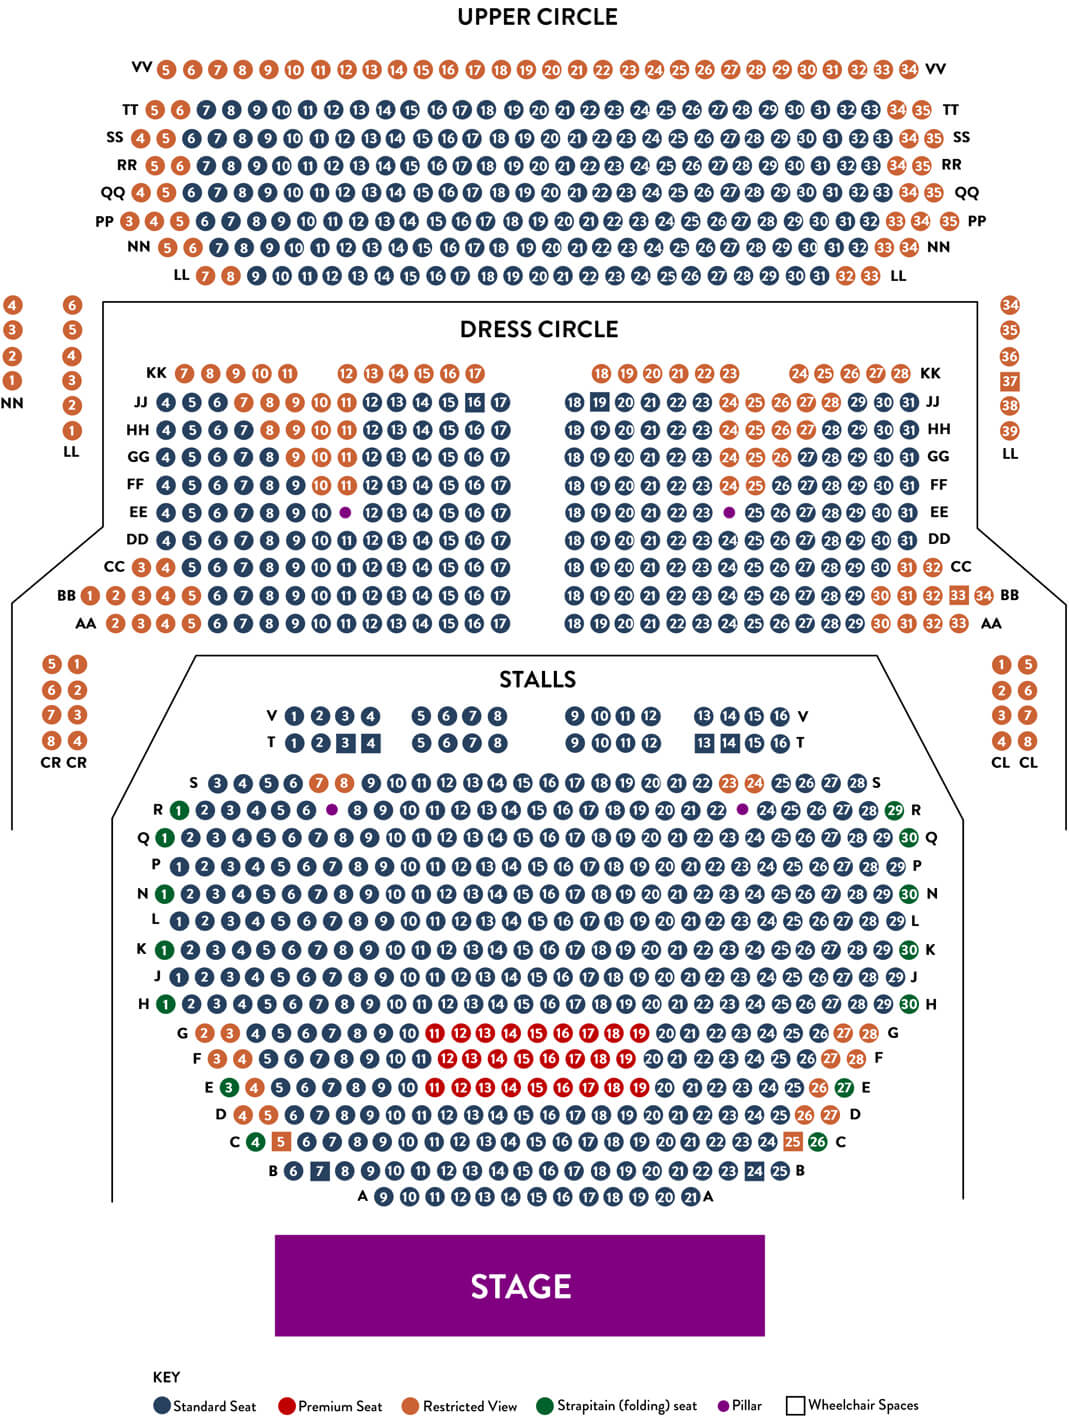 hippodrome-seating-plan-with-numbers.jpg